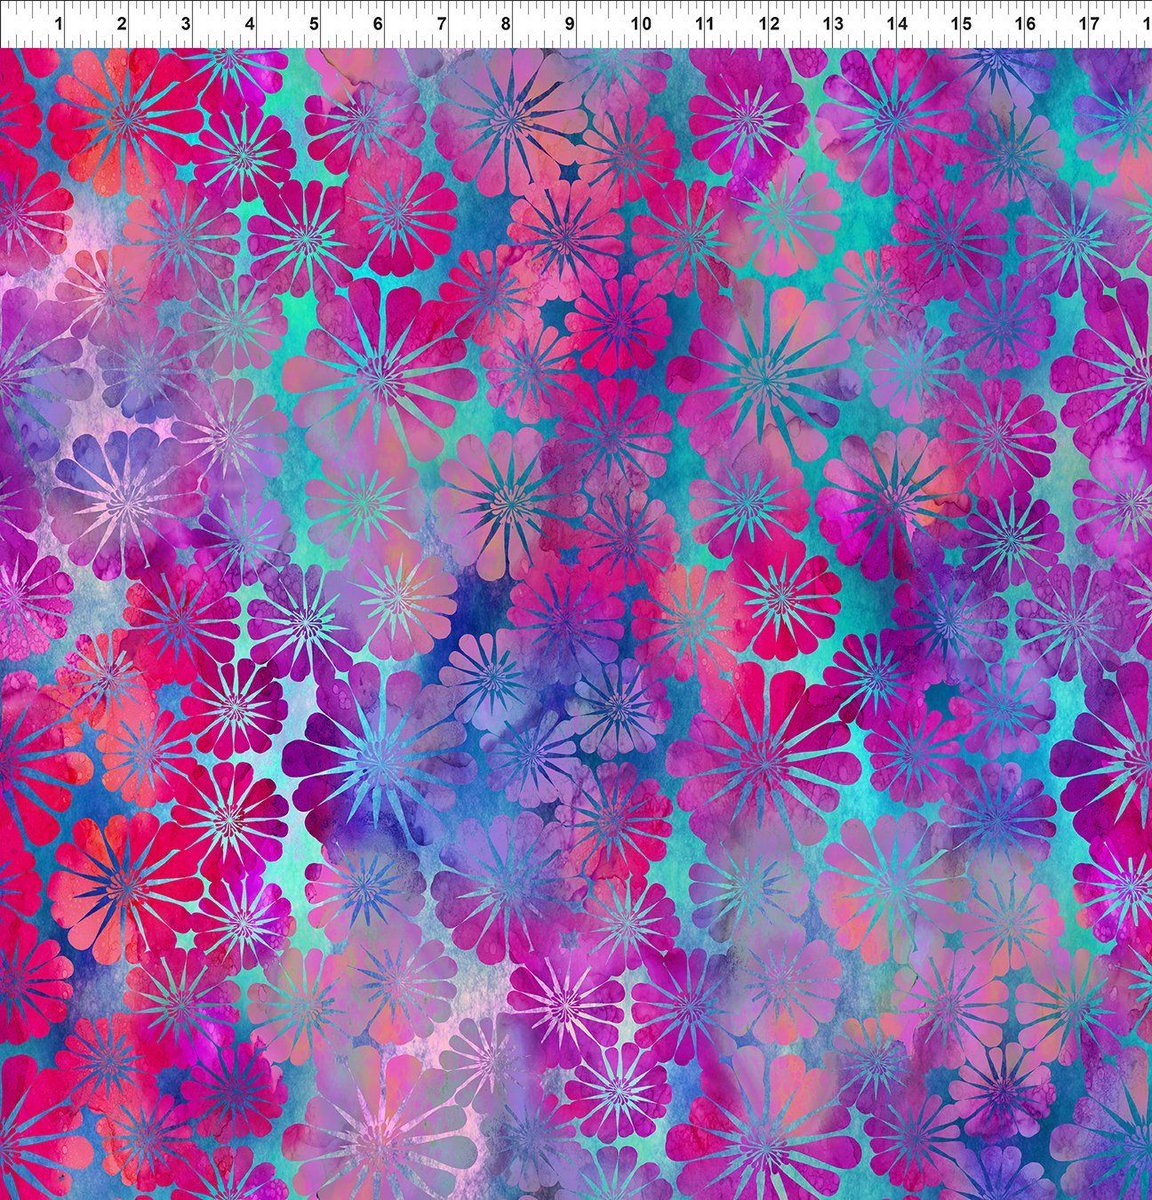 #Impressions 1JYS-3 #Magenta #Daisy From in the Beginning Fabrics, #Vibrant Colors, Digitally Printed #Quilting #Cotton - #Quilting #Sewing #crafting buff.ly/3UJLhuB